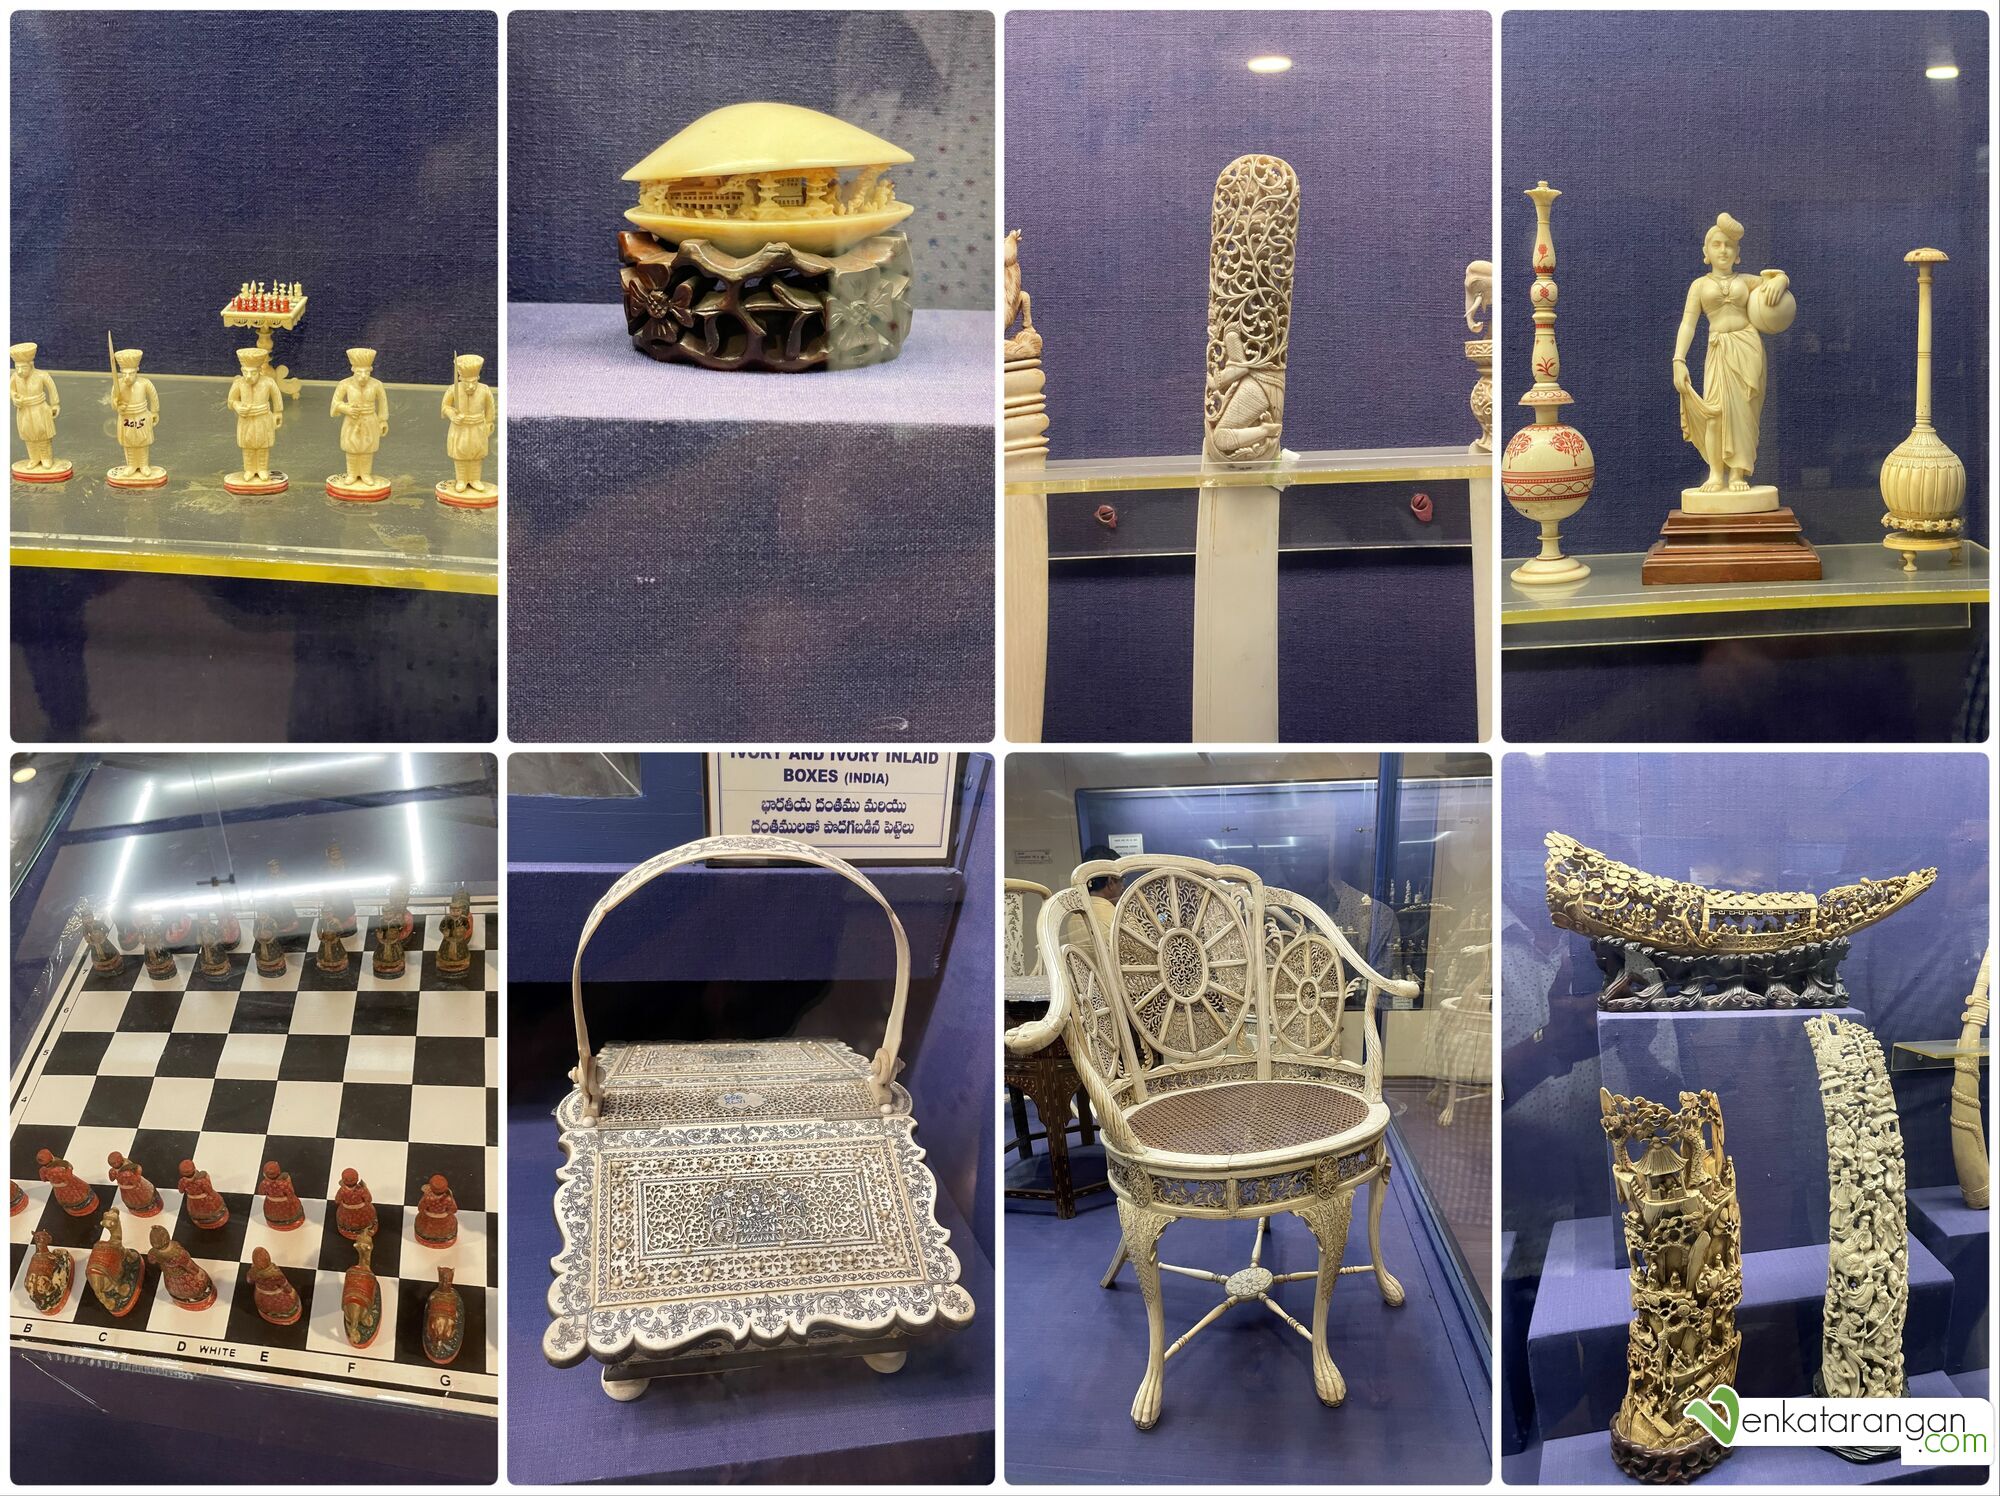 Ivory collection - Chair made of ivory, chess pawns made in ivory, knives made in ivory, ivory inlaid flower box, Ivory doll of Kerala lady 